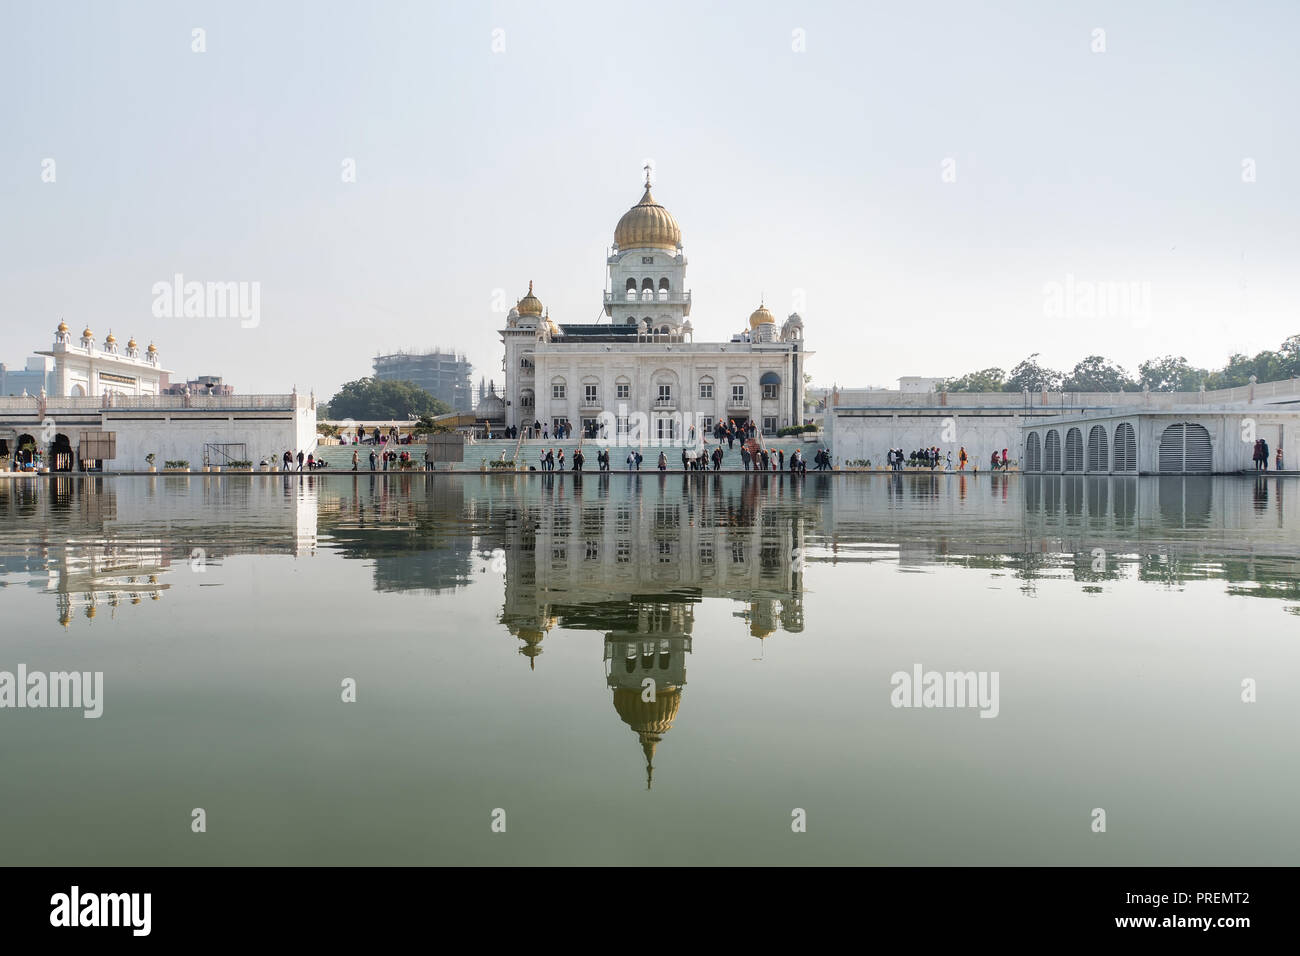 Gurdwara Bangla Sahib is the most prominent Sikh gurdwara. One of the main attractions of new Delhi. A large pond in front of the temple Stock Photo